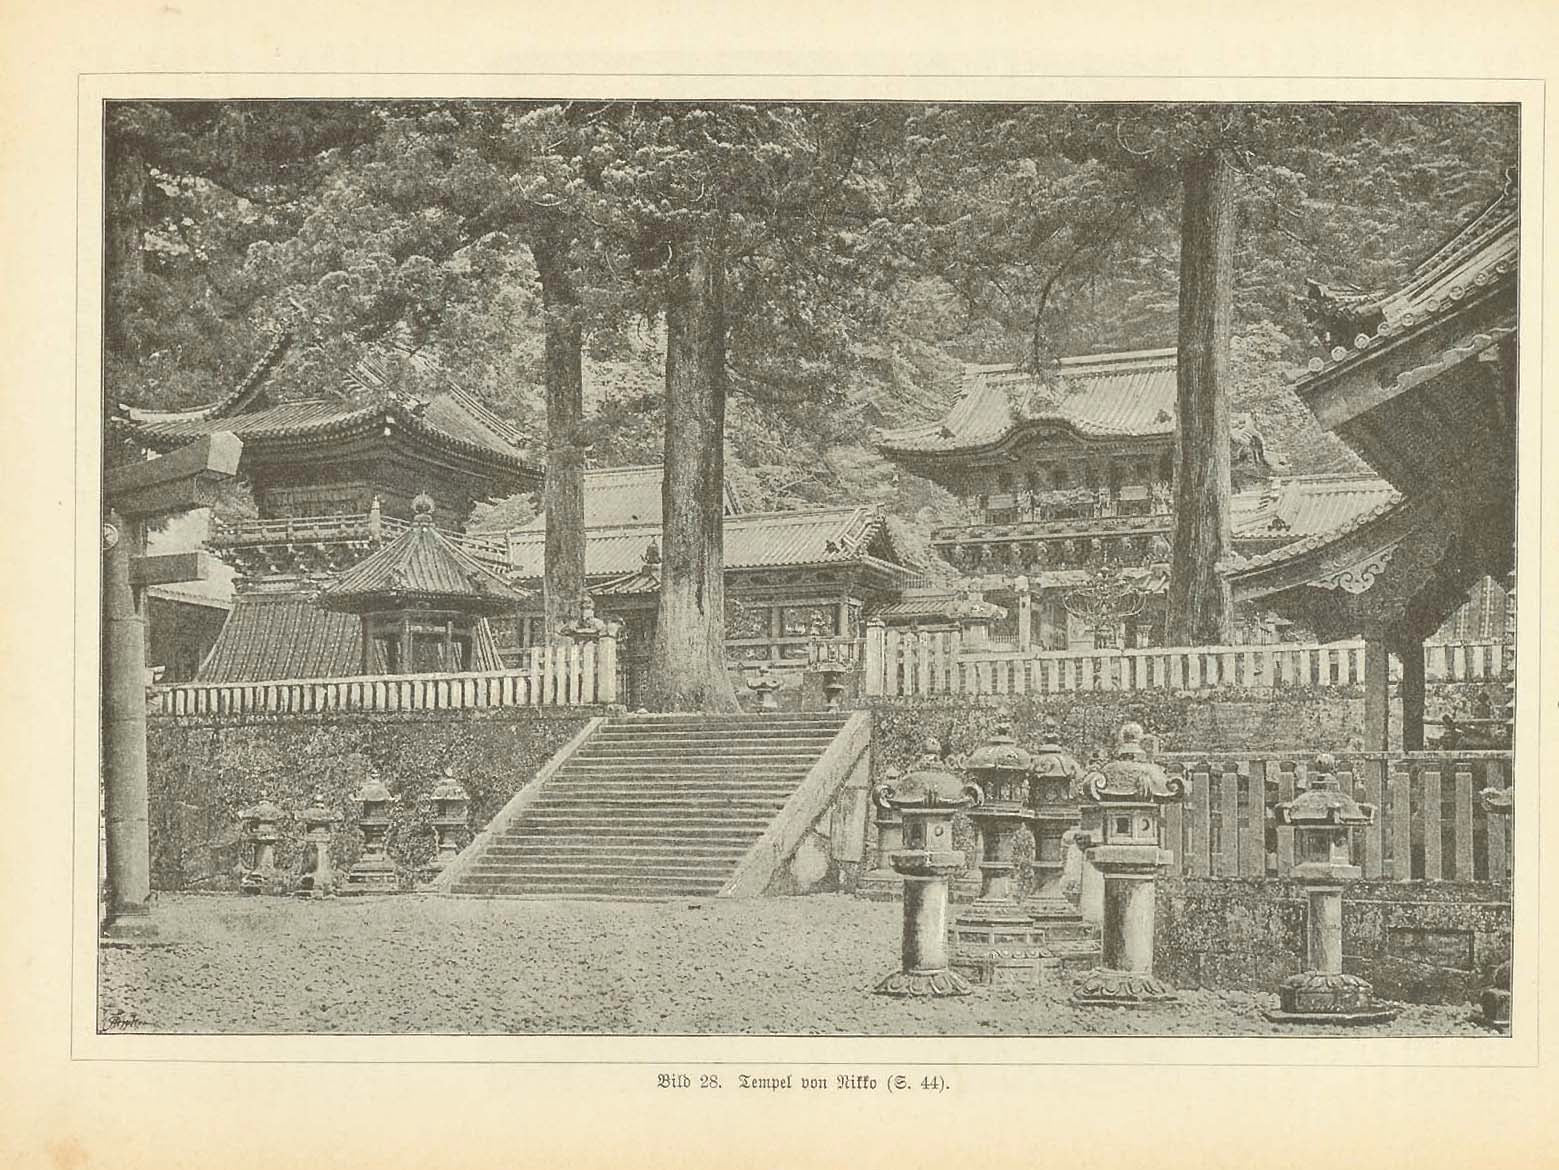 "Temple von Nikko"  Wood engraving made after a photograph. Published 1895. On the reverse side is an image of the Shinto pagoda Tschiogama (Shiogama) and German text about the region and culture.  Original antique print , interior design, wall decoration, ideas, idea, gift ideas, present, vintage, charming, special, decoration, home interior, living room design